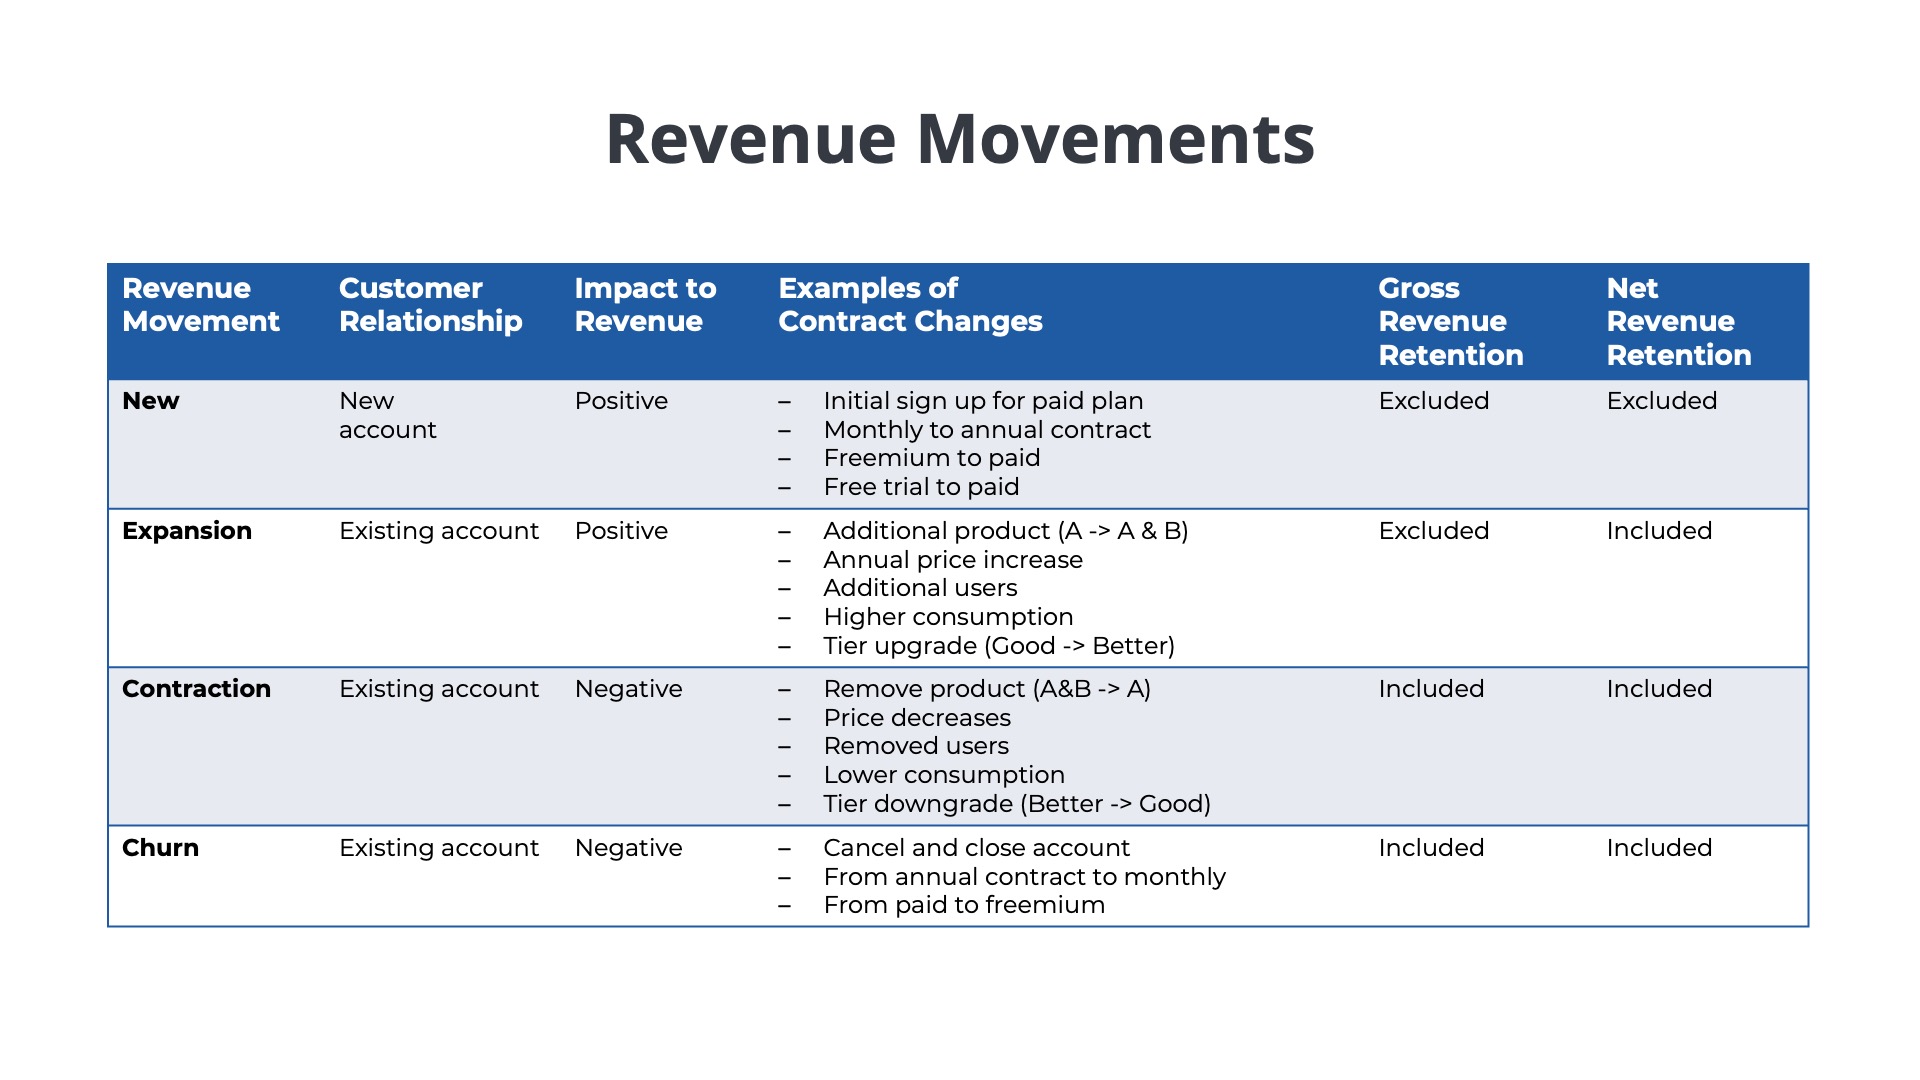 ARR movements including new, expansion, contraction, churn and how they impact gross and net revenue retention